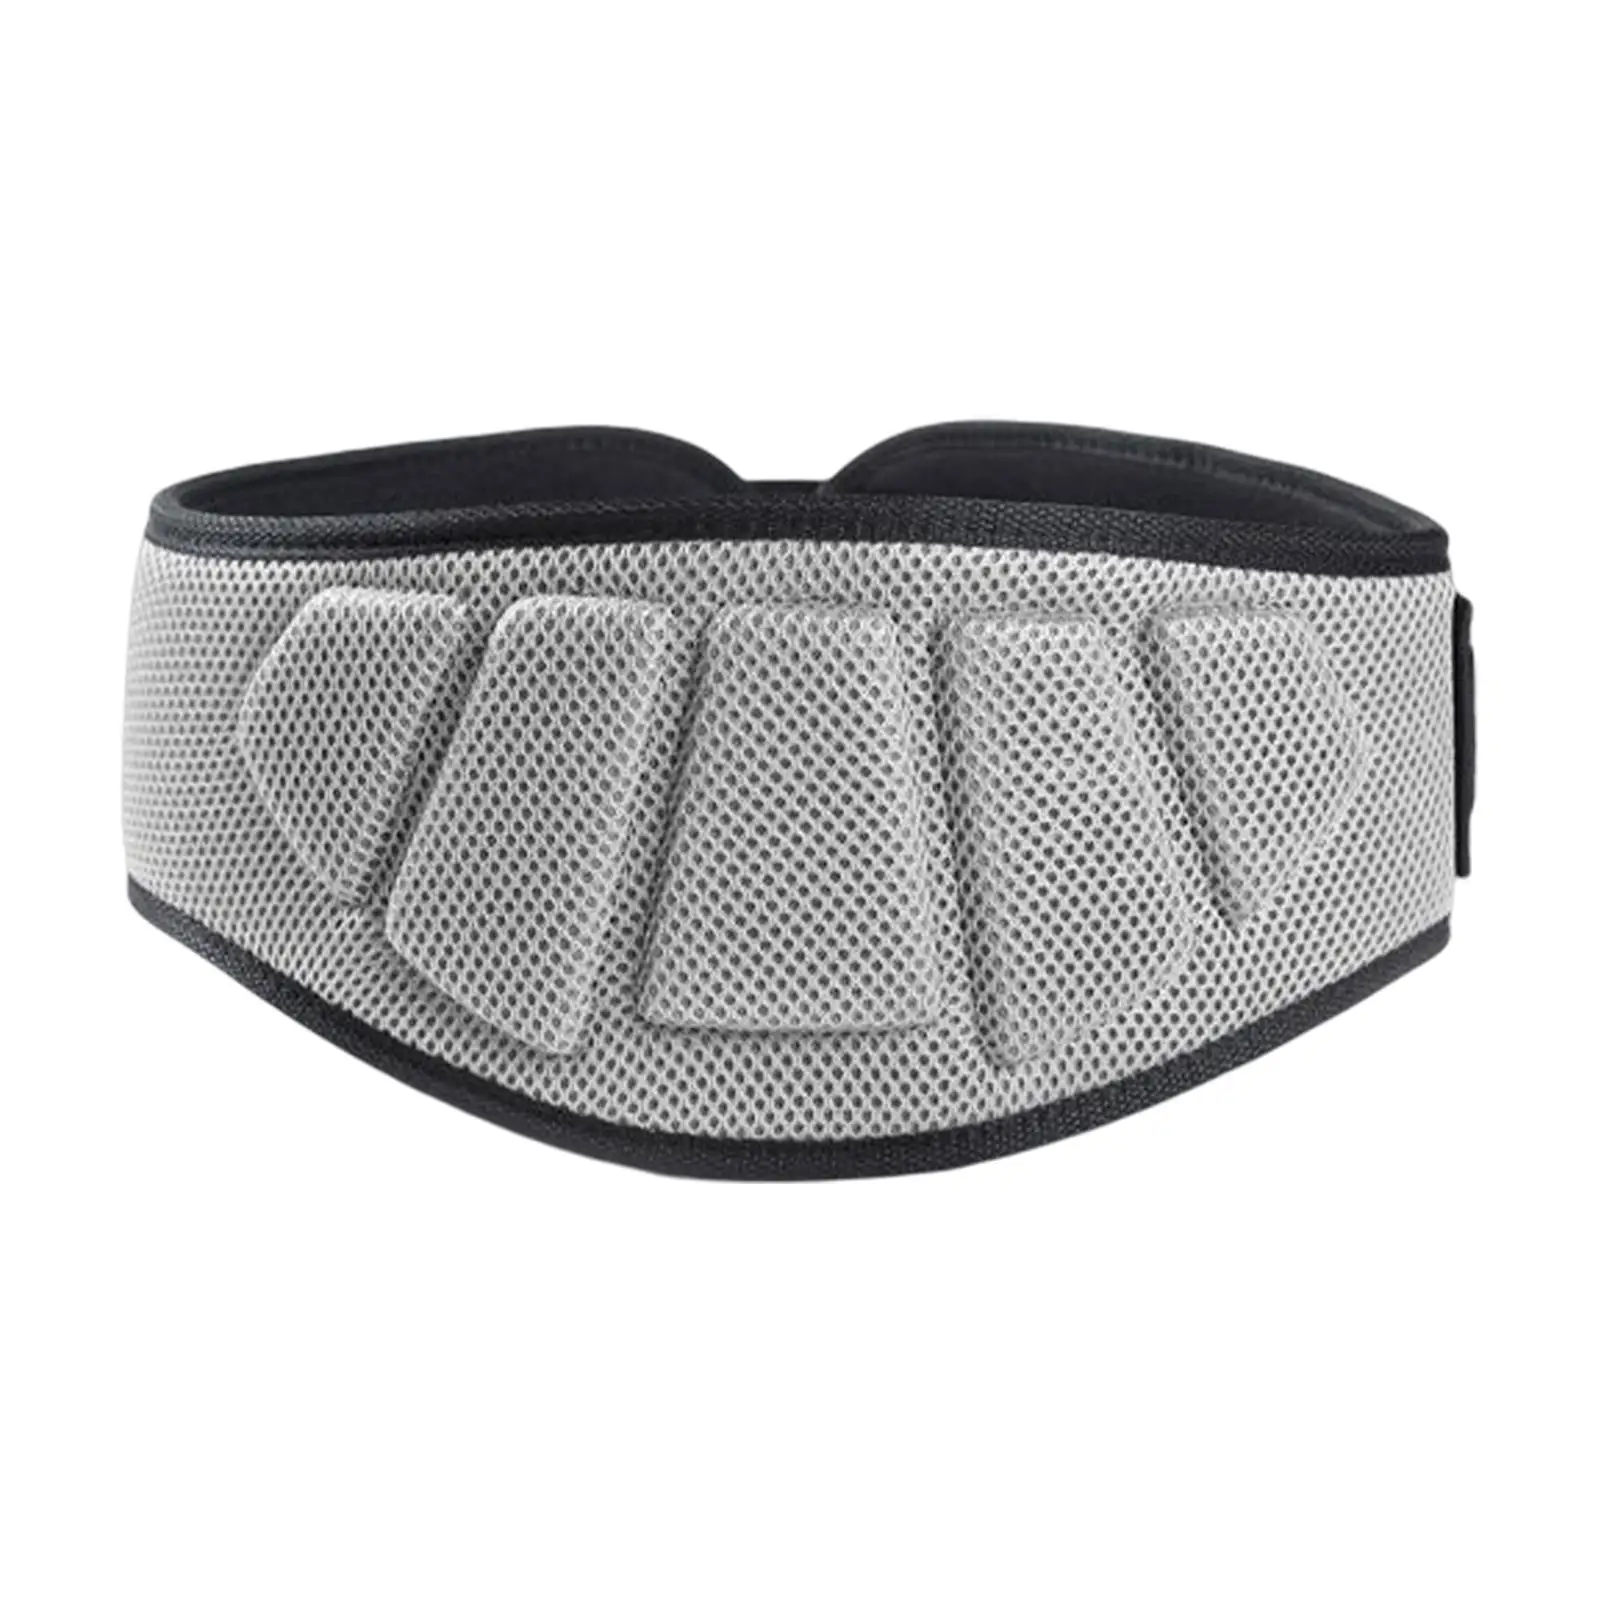 Weight Lifting Belt Powerlifting Support Fitness Weightlifting Belt for Deadlift